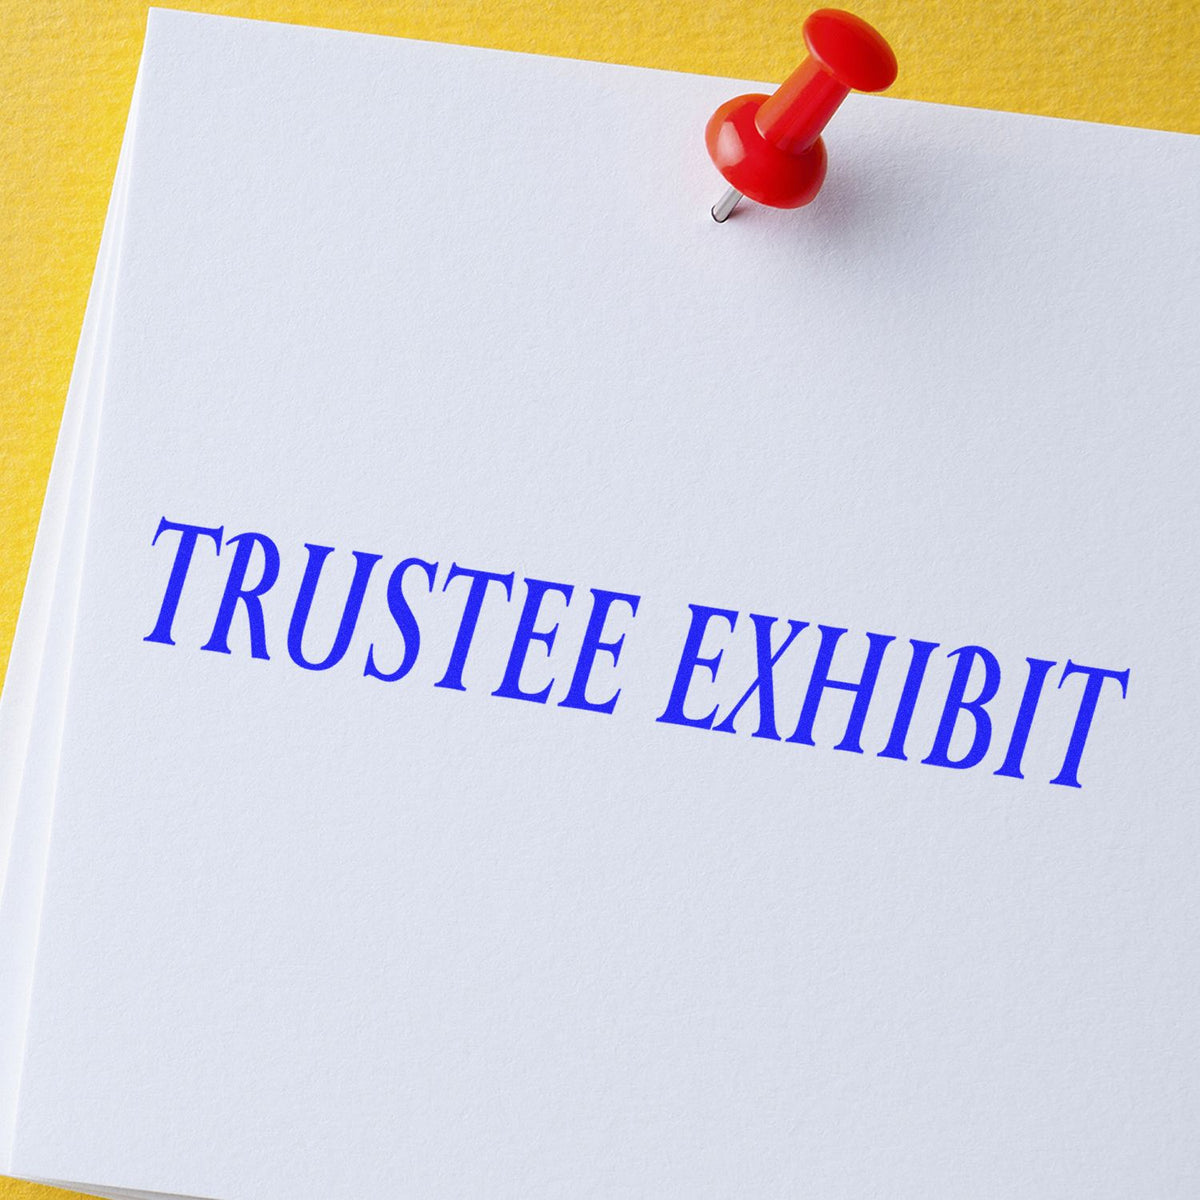 Large Trustee Exhibit Rubber Stamp In Use Photo